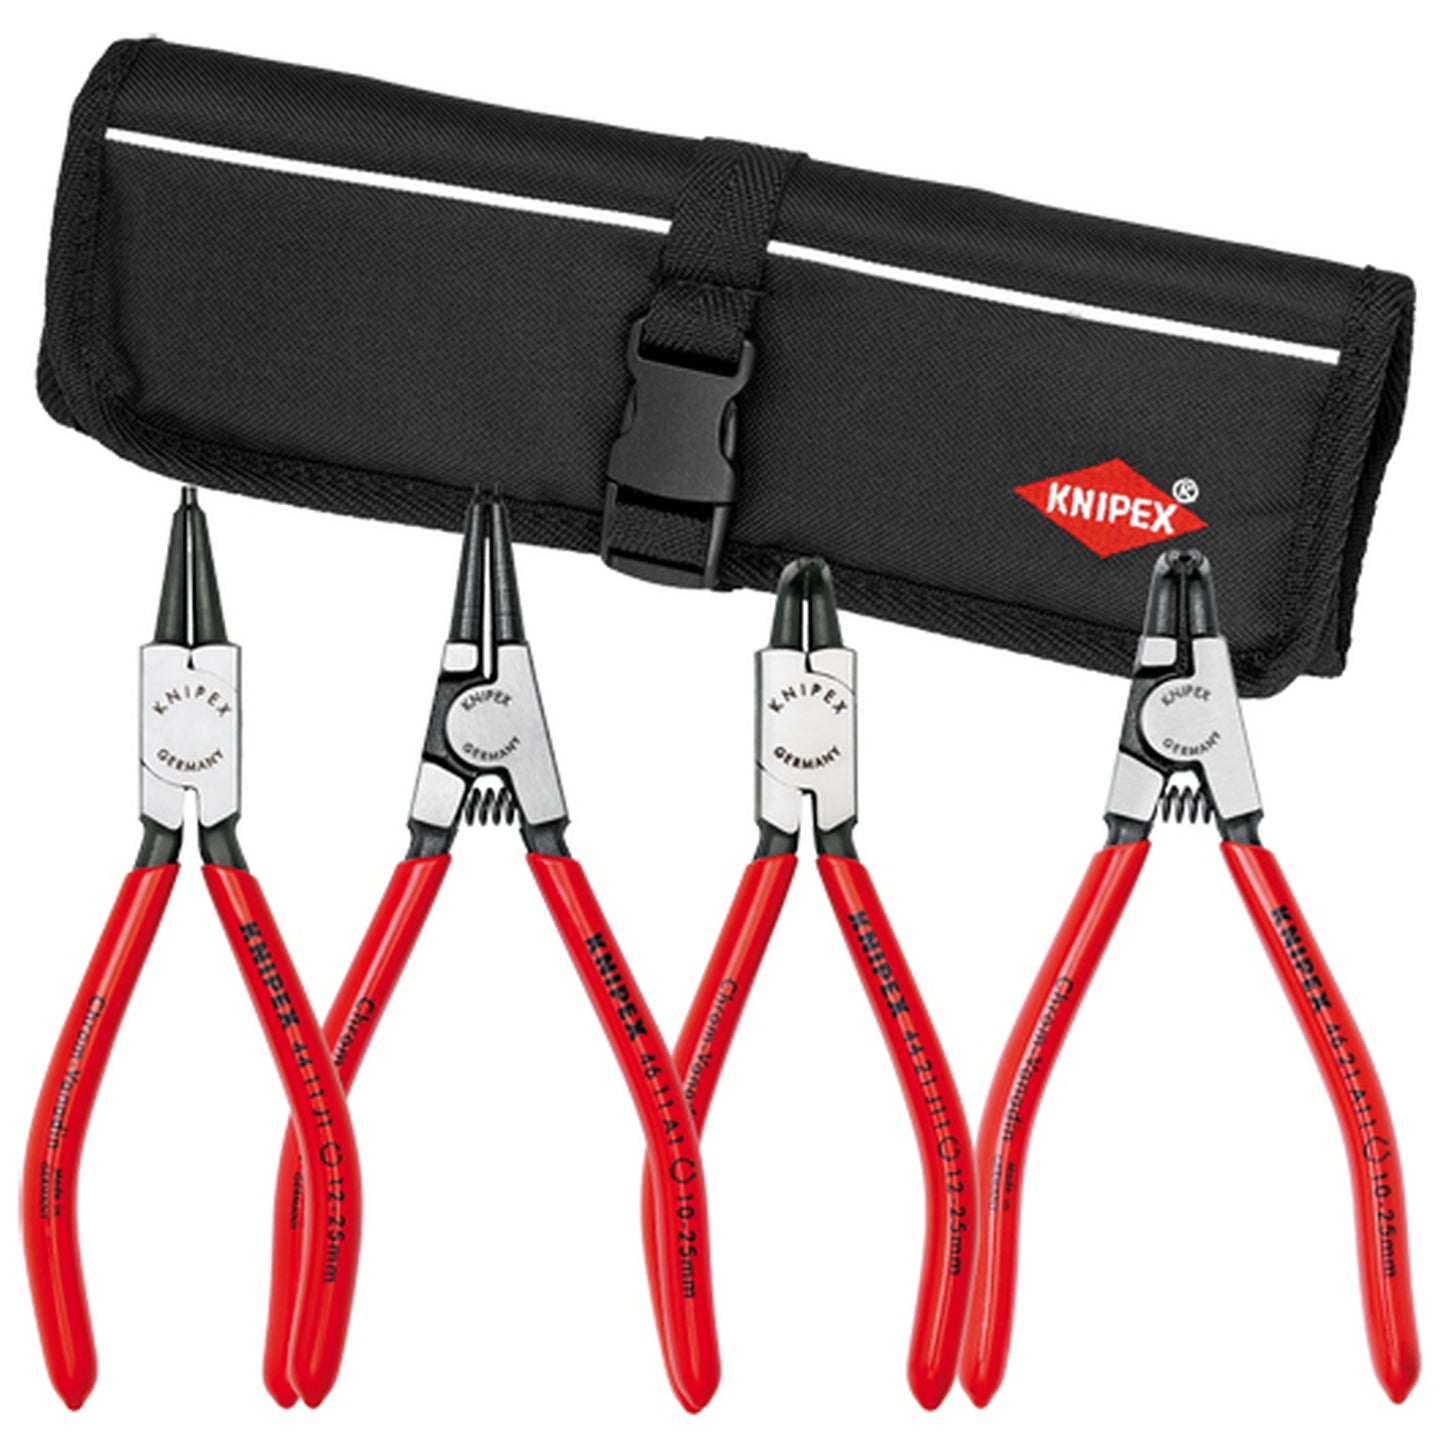 Knipex Snap Ring Pliers Set In Pouch 4 Pieces 9K 00 19 52 US